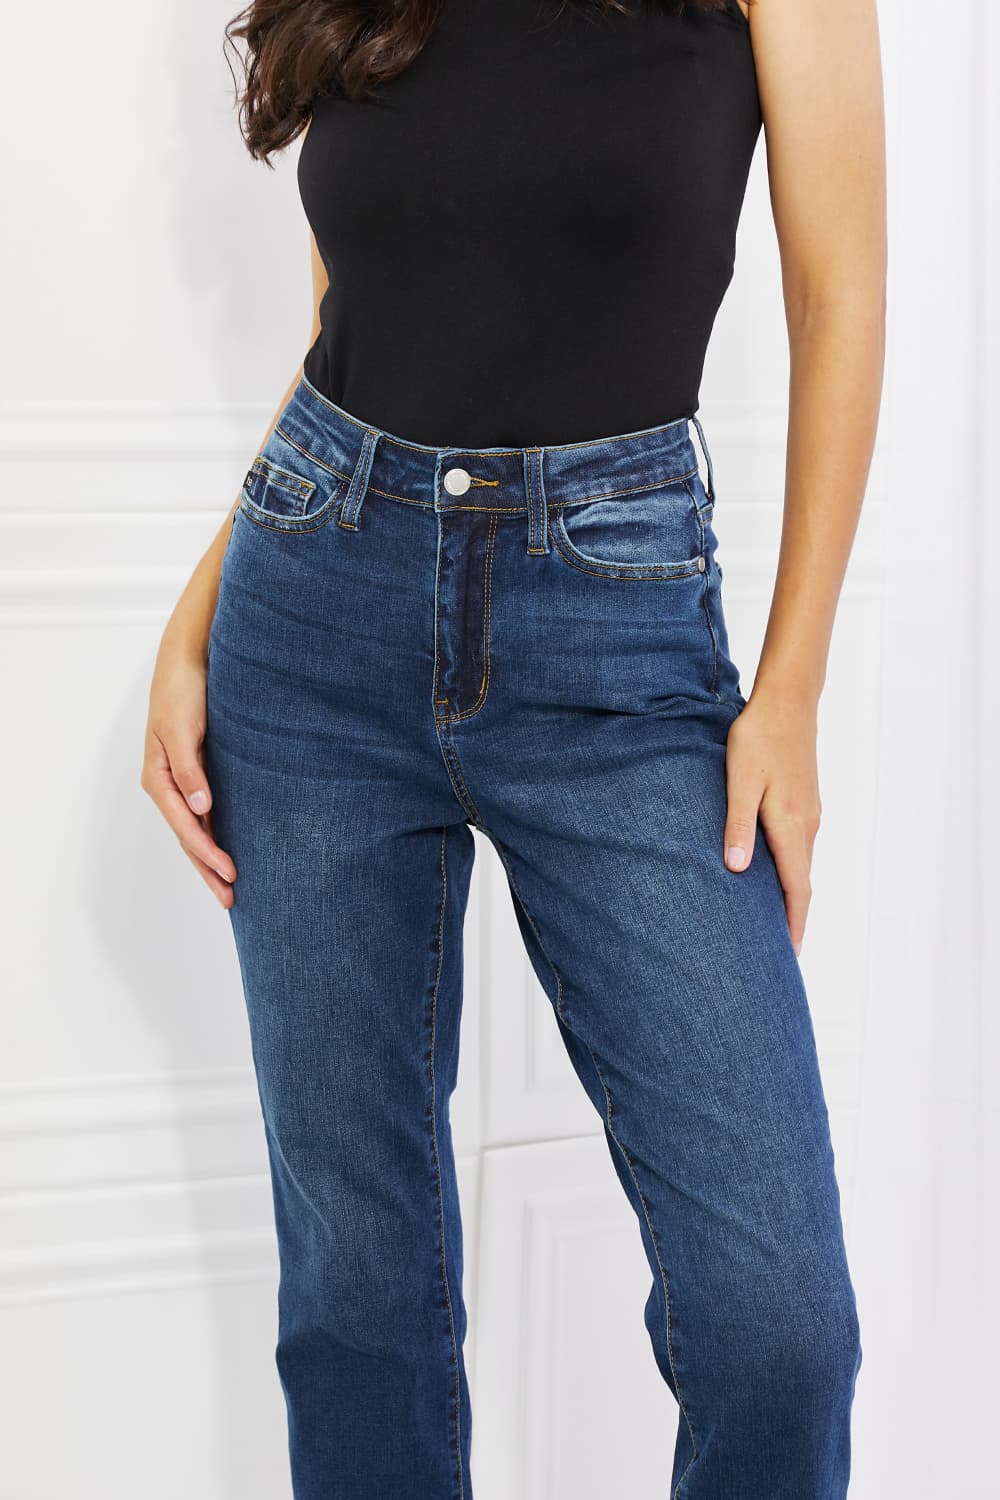 Close-Up, Judy Blue, High-Rise Sustainable Cool Denim Cuffed Boyfriend Jeans Style 88608